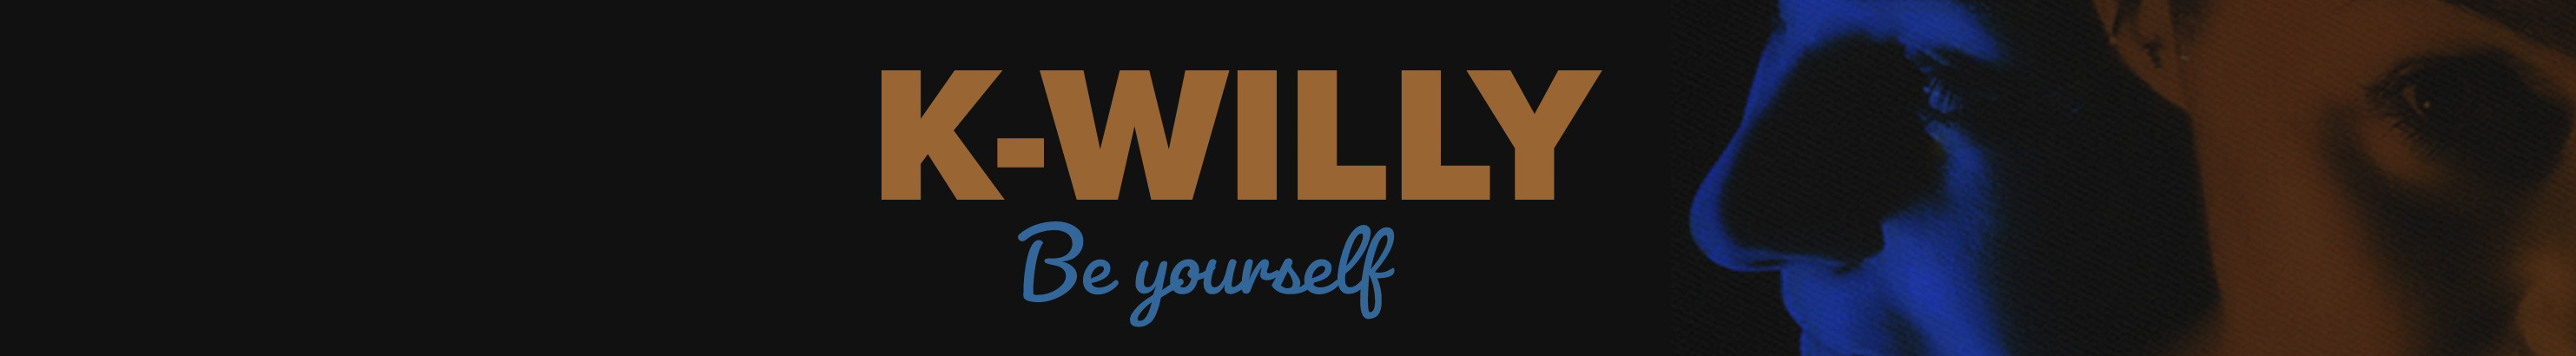 🐼 K-willy's profile banner